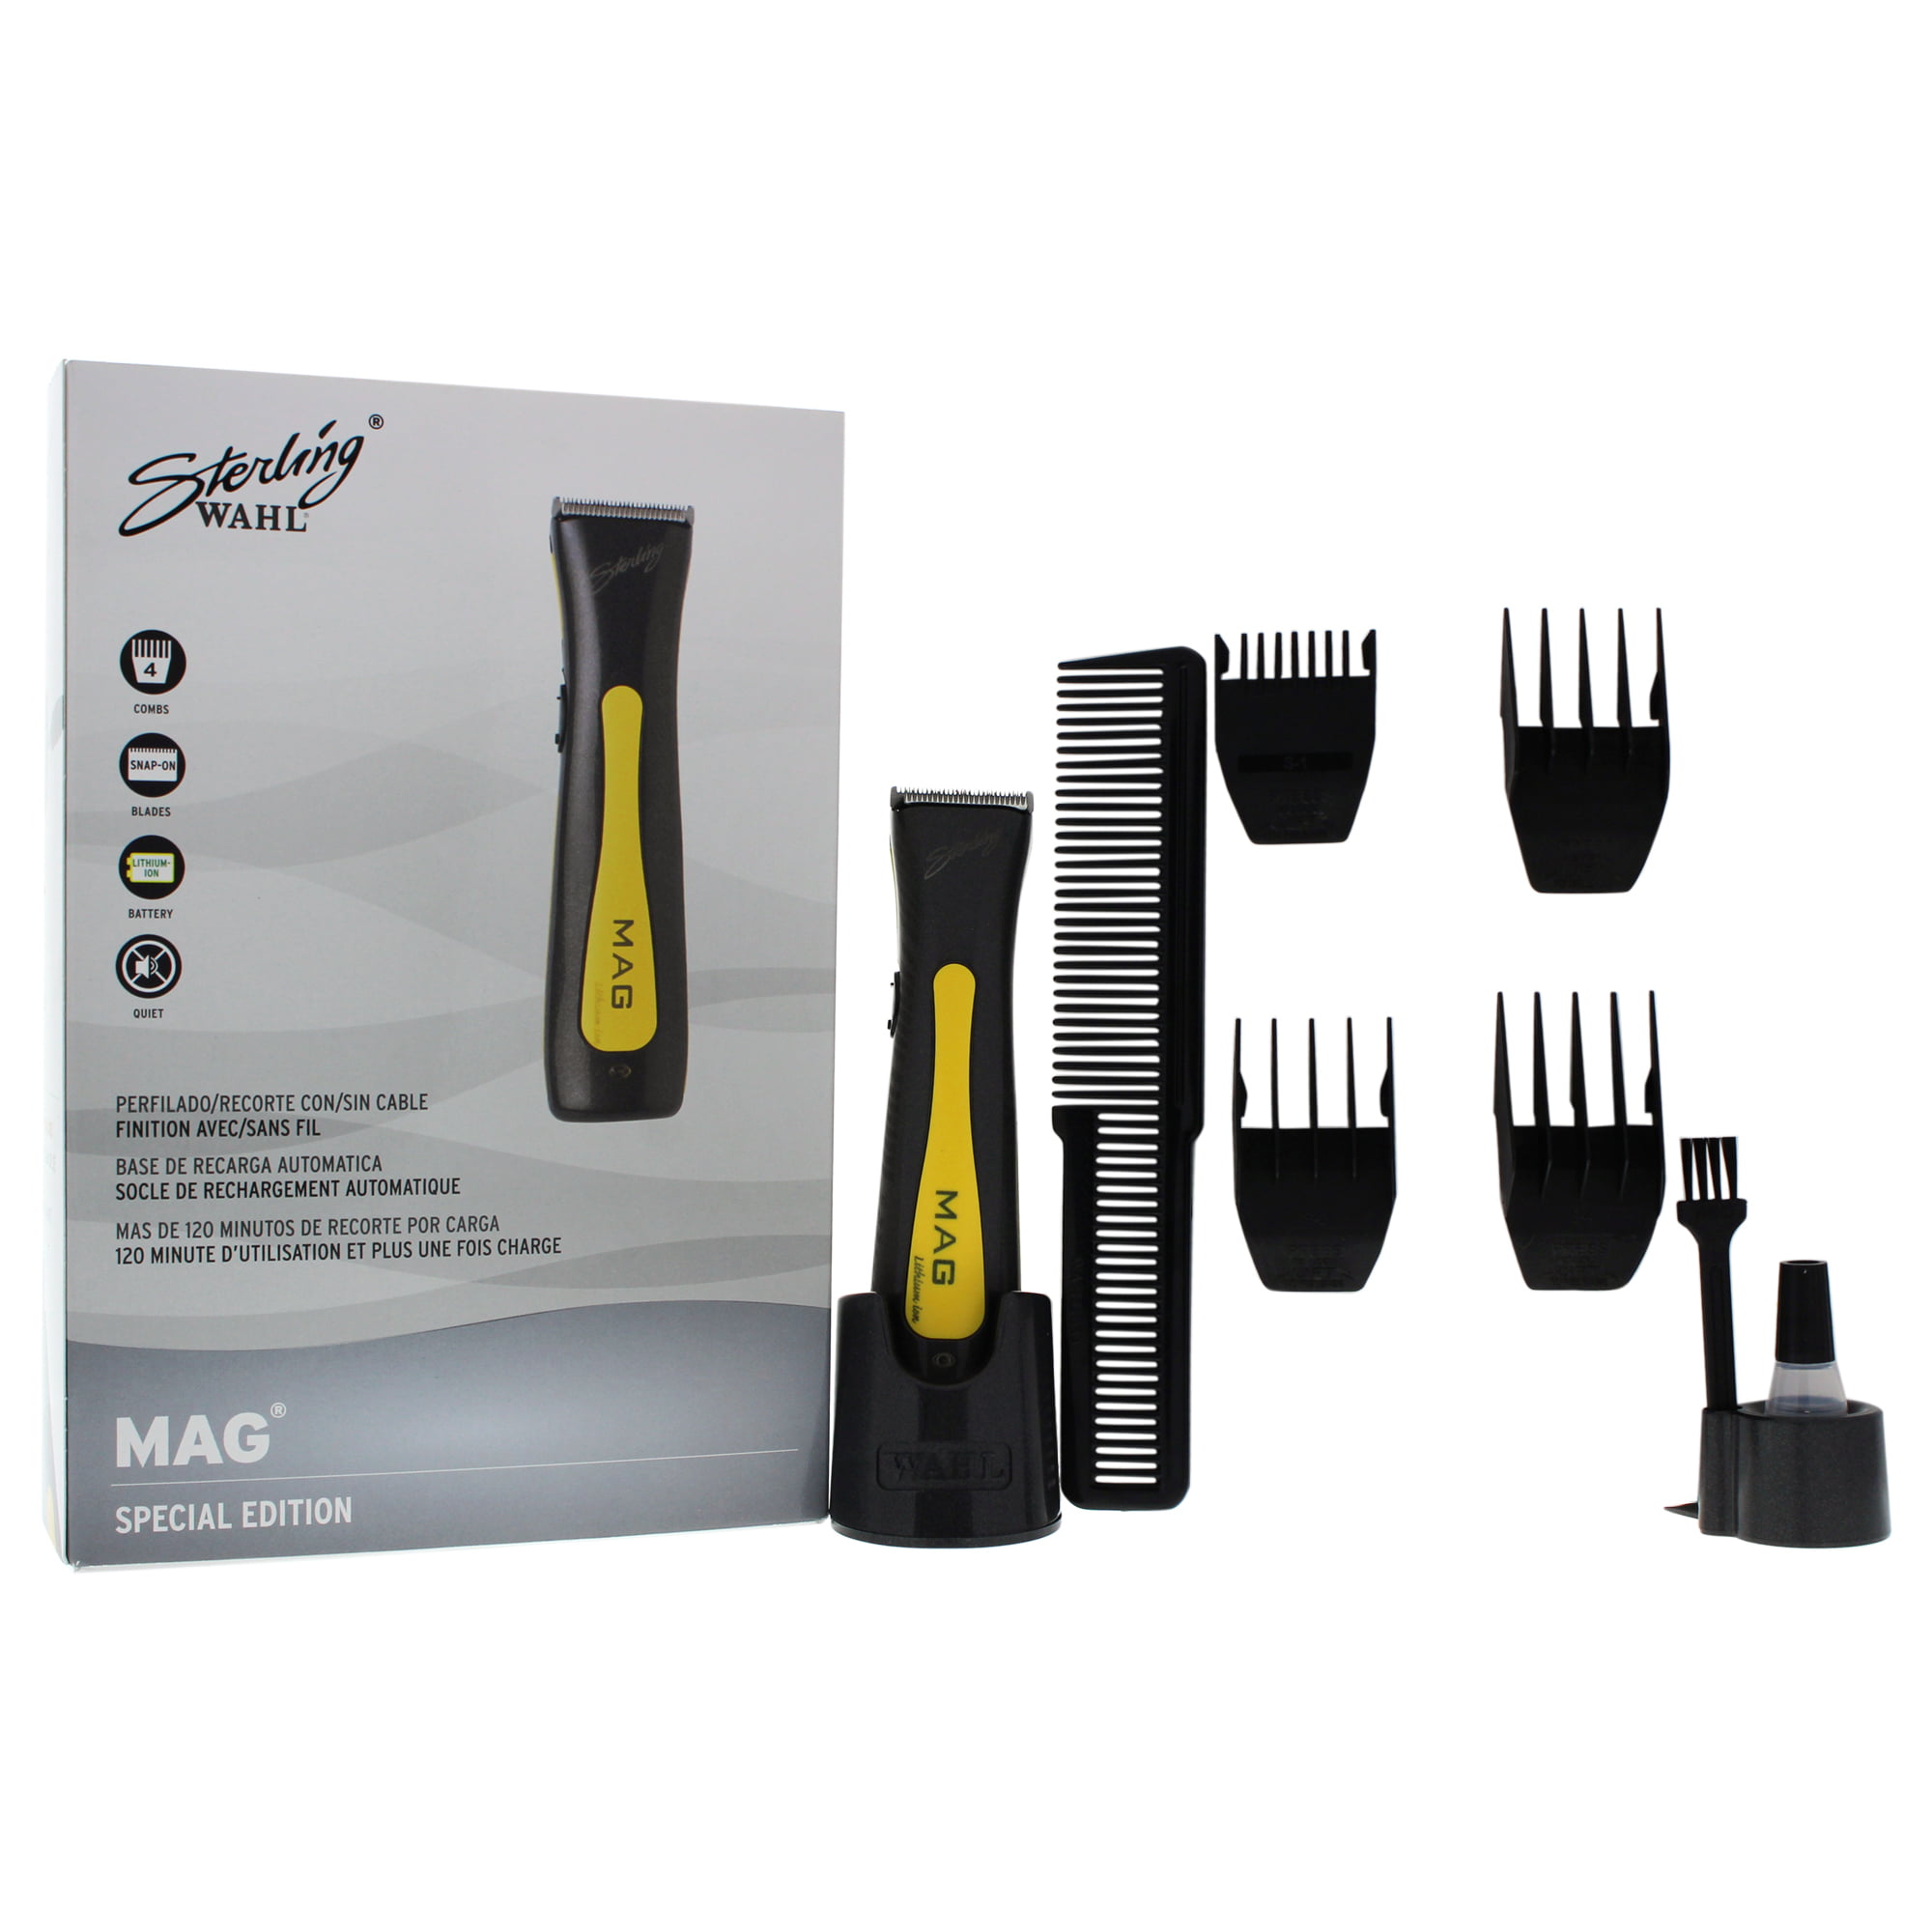 wahl sterling big mag clippers